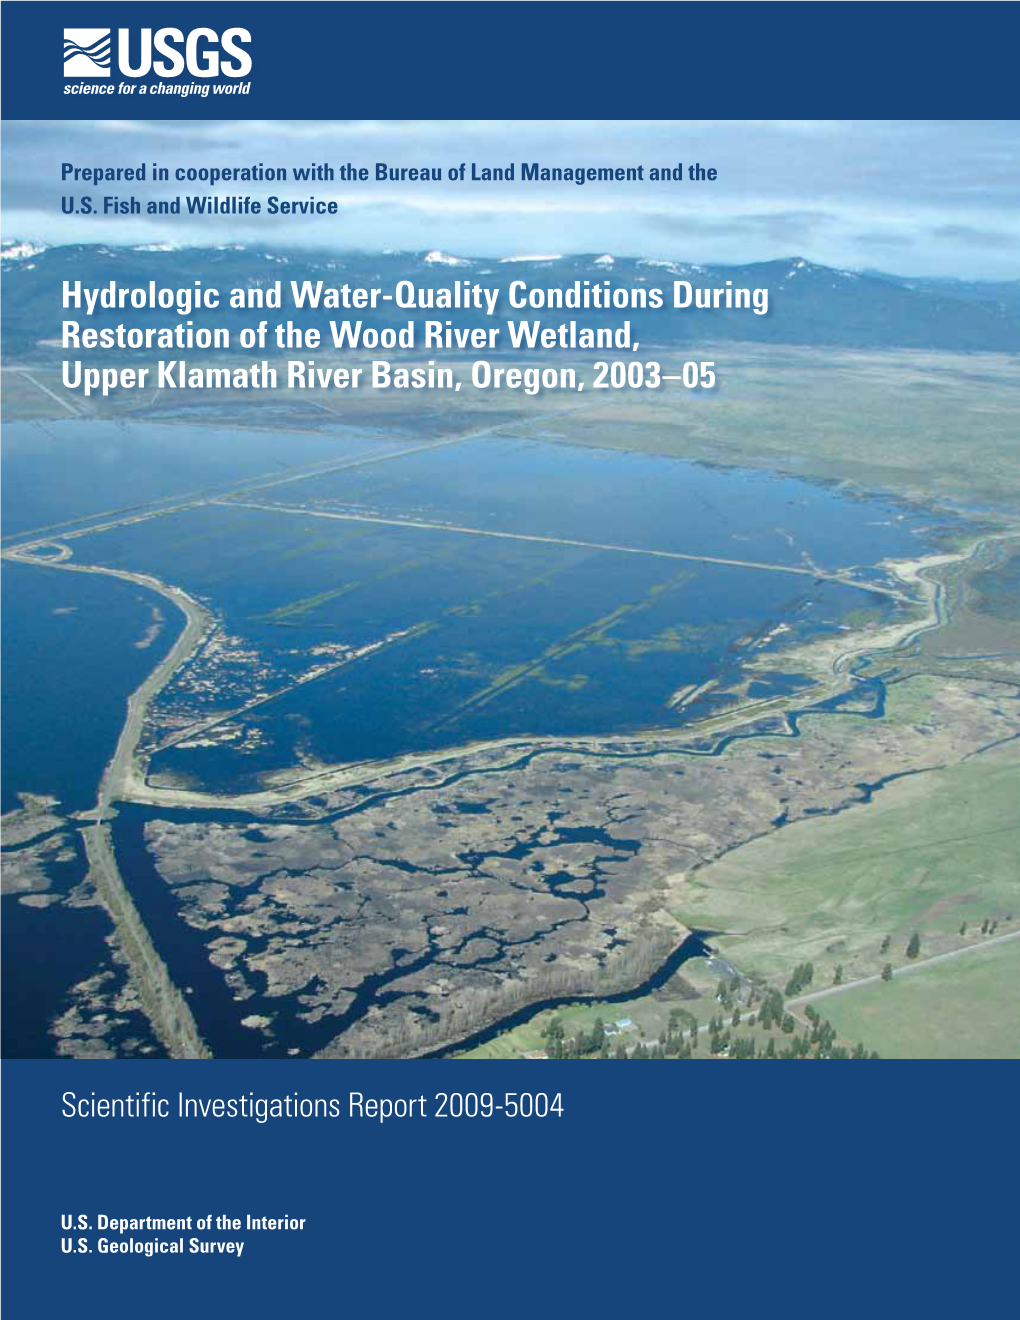 Hydrologic and Water-Quality Conditions During Restoration of the Wood River Wetland, Upper Klamath River Basin, Oregon, 2003–05